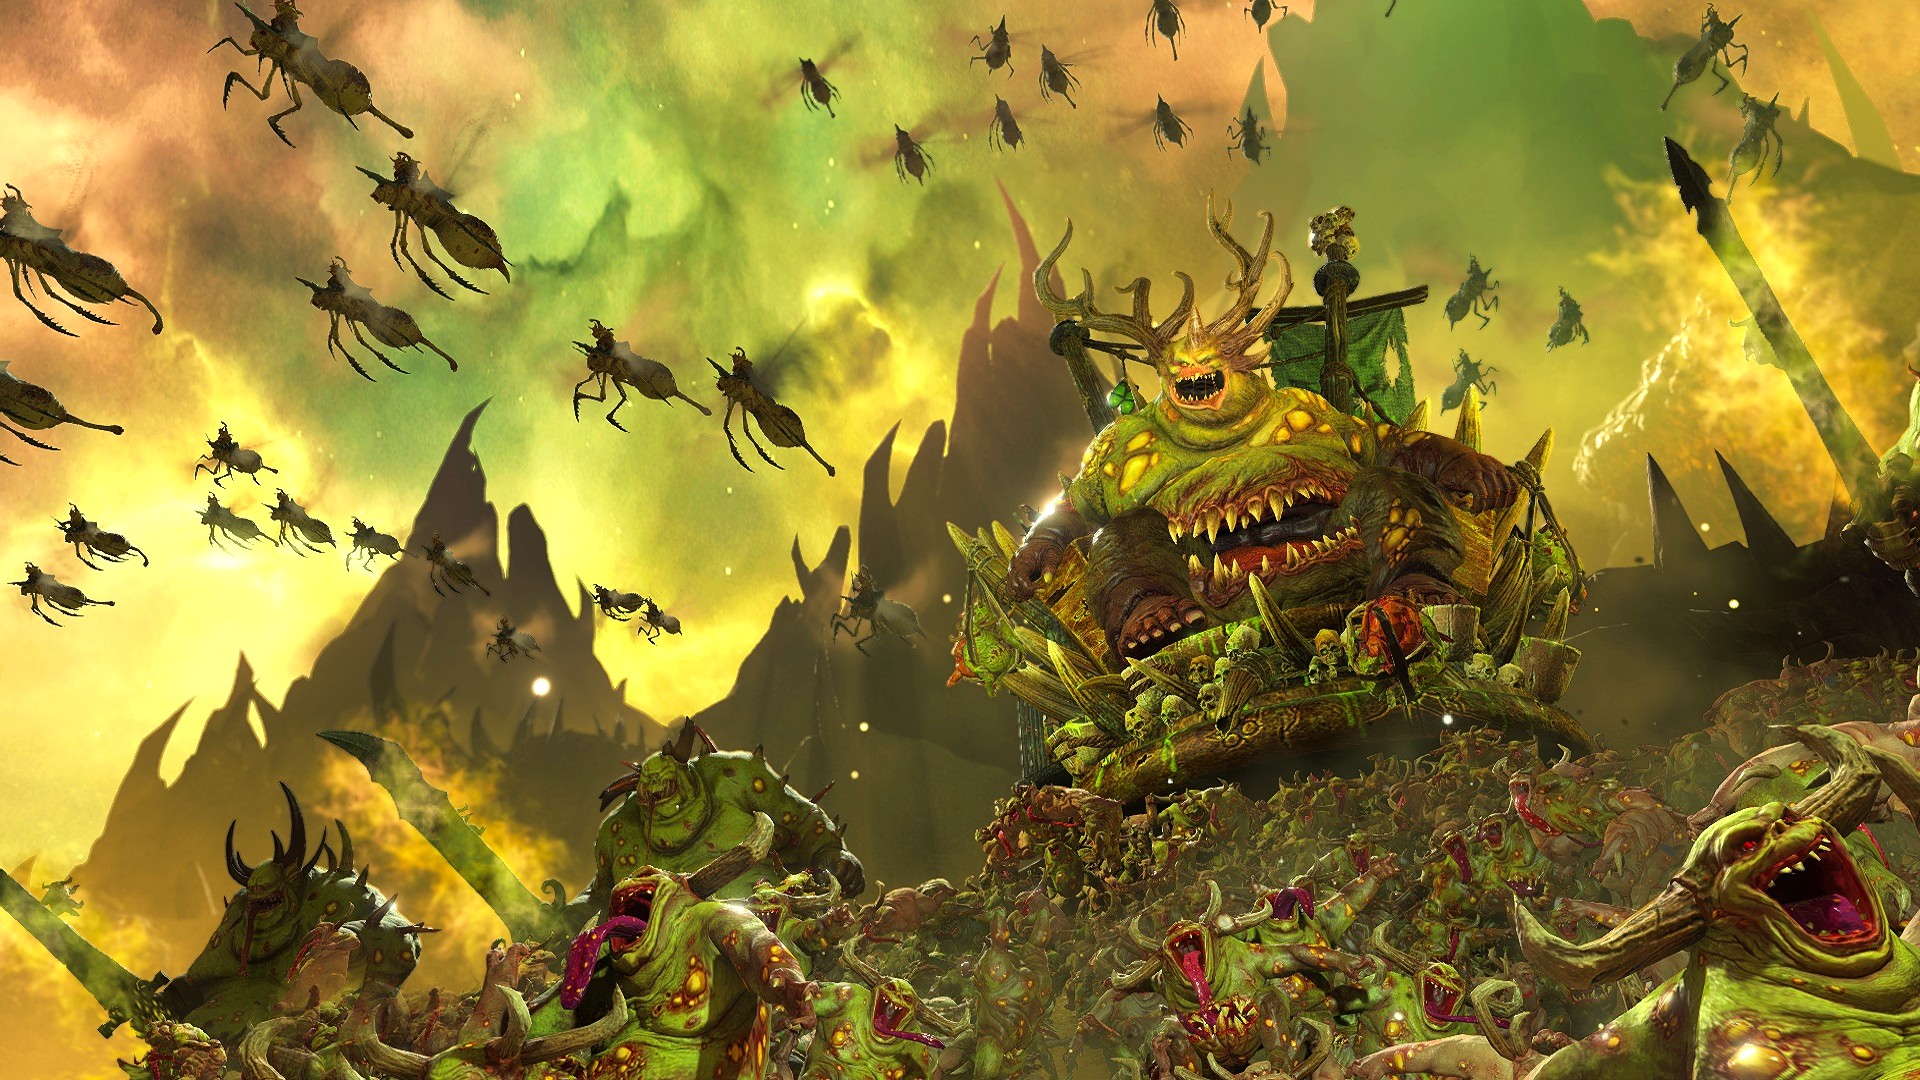 Creative Assembly lifts the veil on Nurgle and Slaanesh for Total War: Warhammer 3